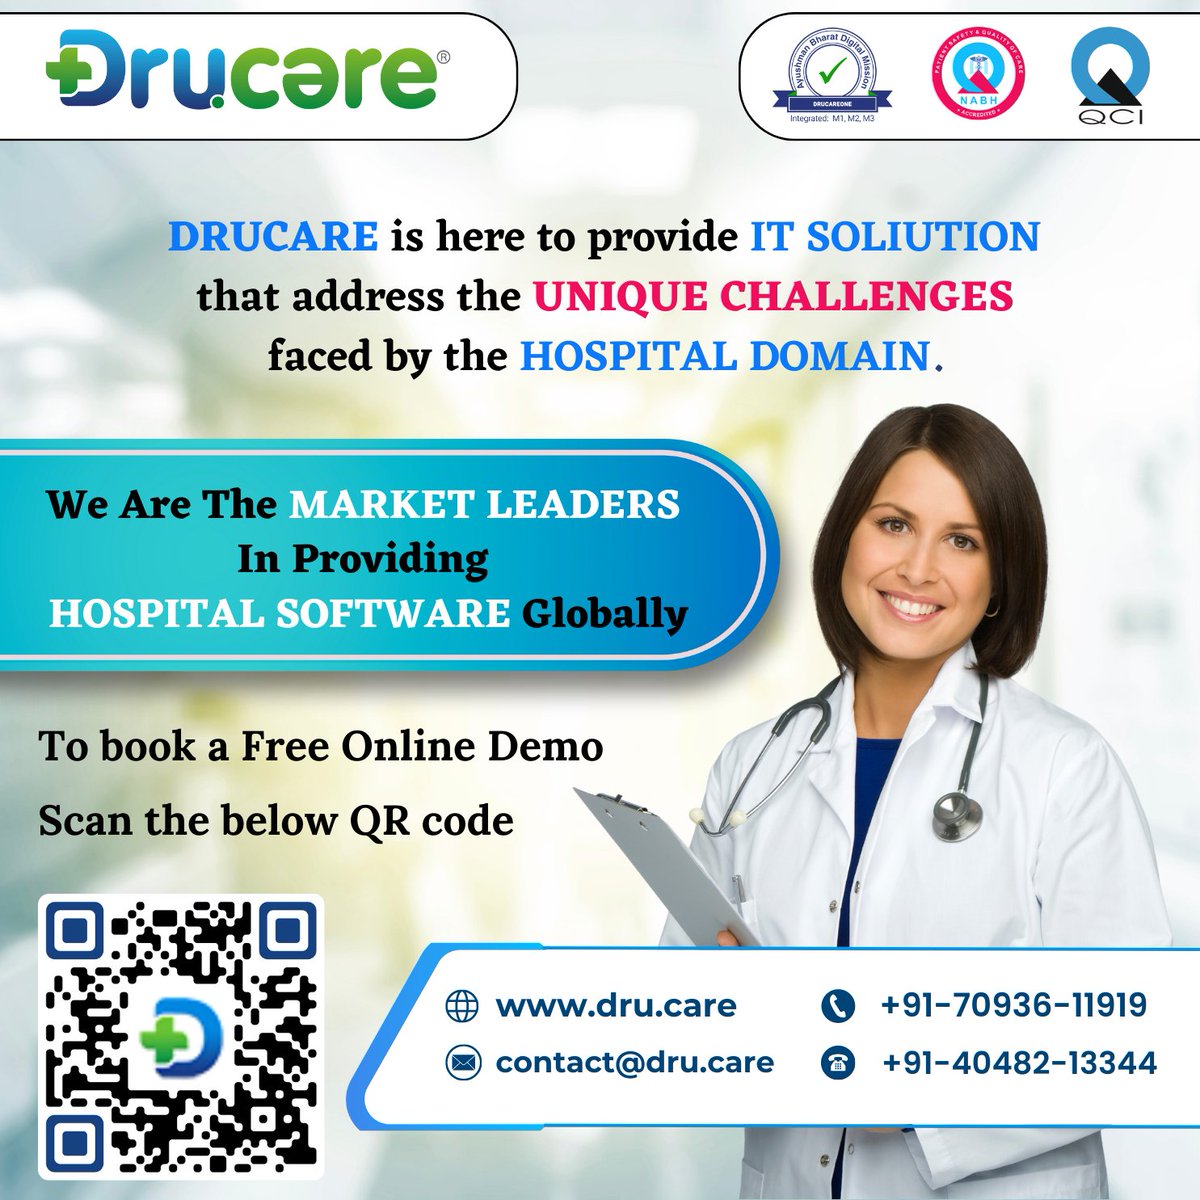 Book a free online demo today and see how it can transform your healthcare organization! 📆
Book demo here: zurl.co/VIRq

#hospitalsoftware #hospitaldirectors #MedicalDean #Bangloredoctors #digitalhealthcare #MeghalayaHospitals #assamhospitals #Arunachalhospitals